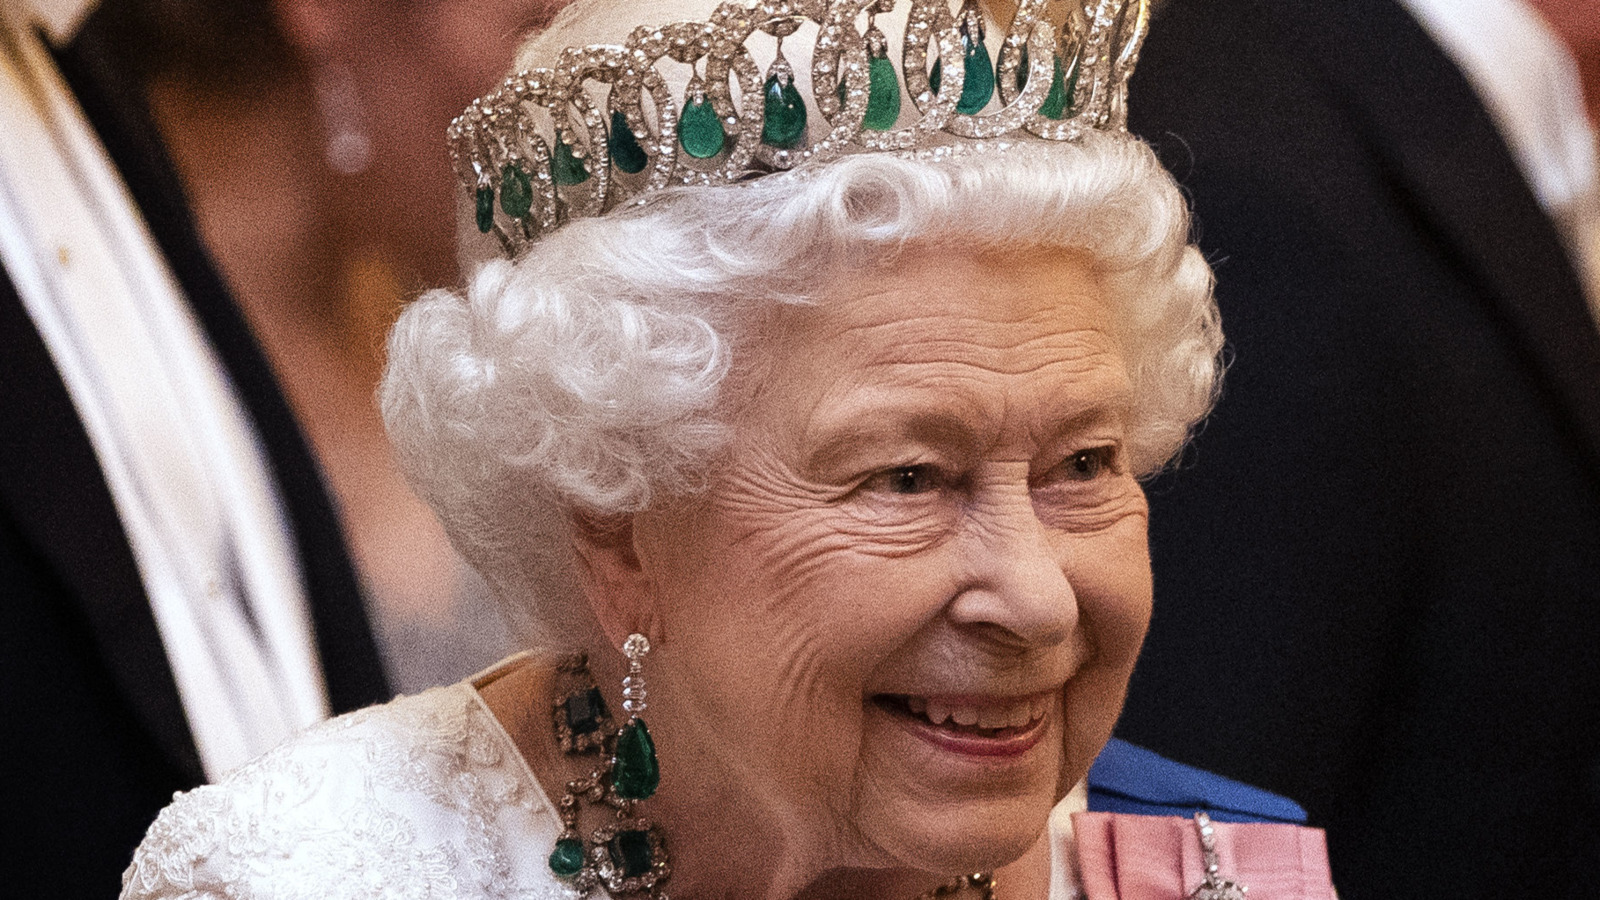 The Real Reason The Queen Will Never Abdicate